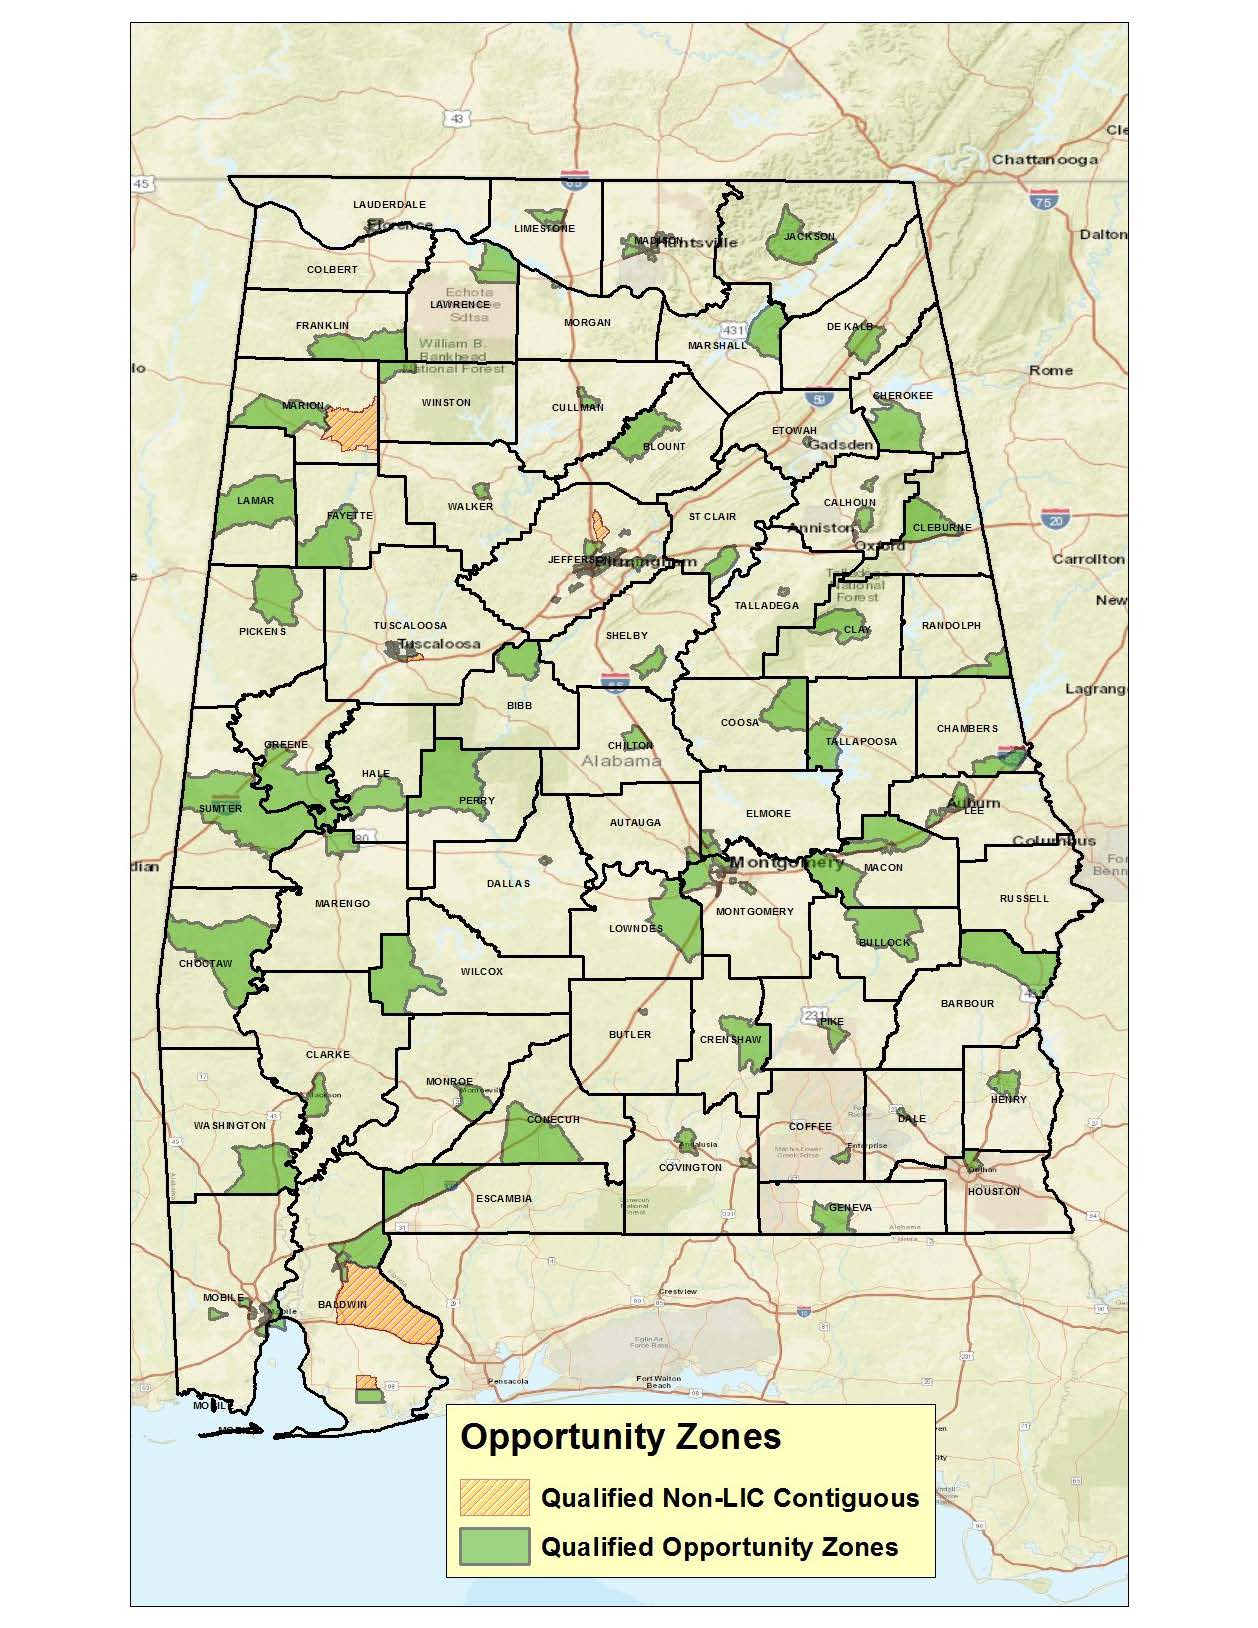 Alabama’s Opportunity Zones Approved by U.S. Treasury Department, IRS